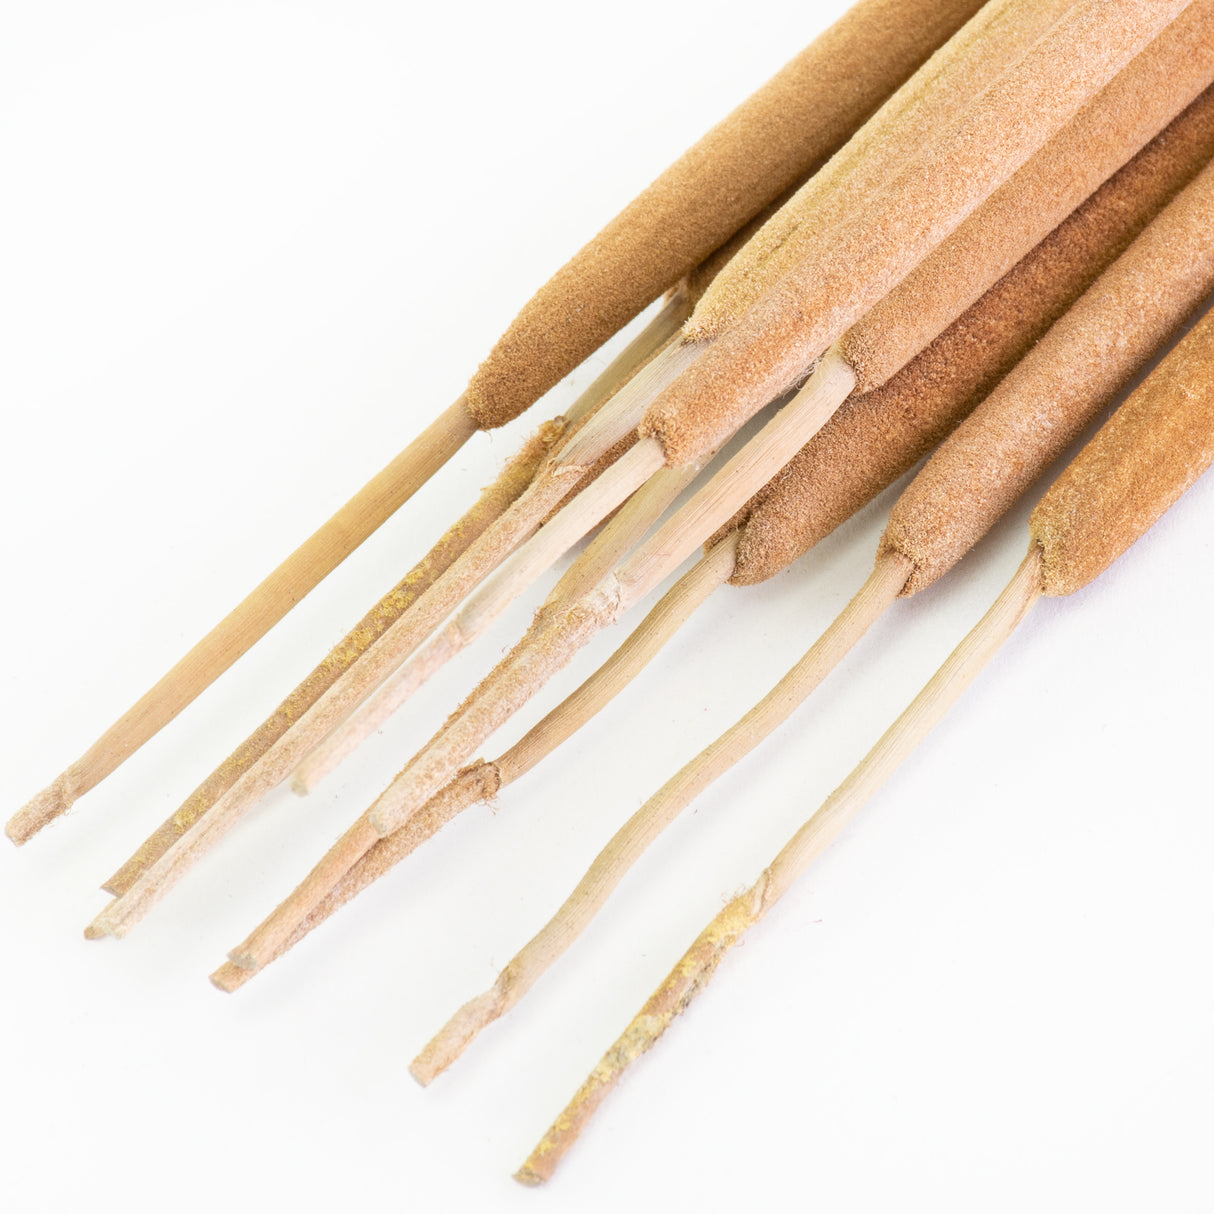 This image shows a bunch of natural coloured typha against a white background